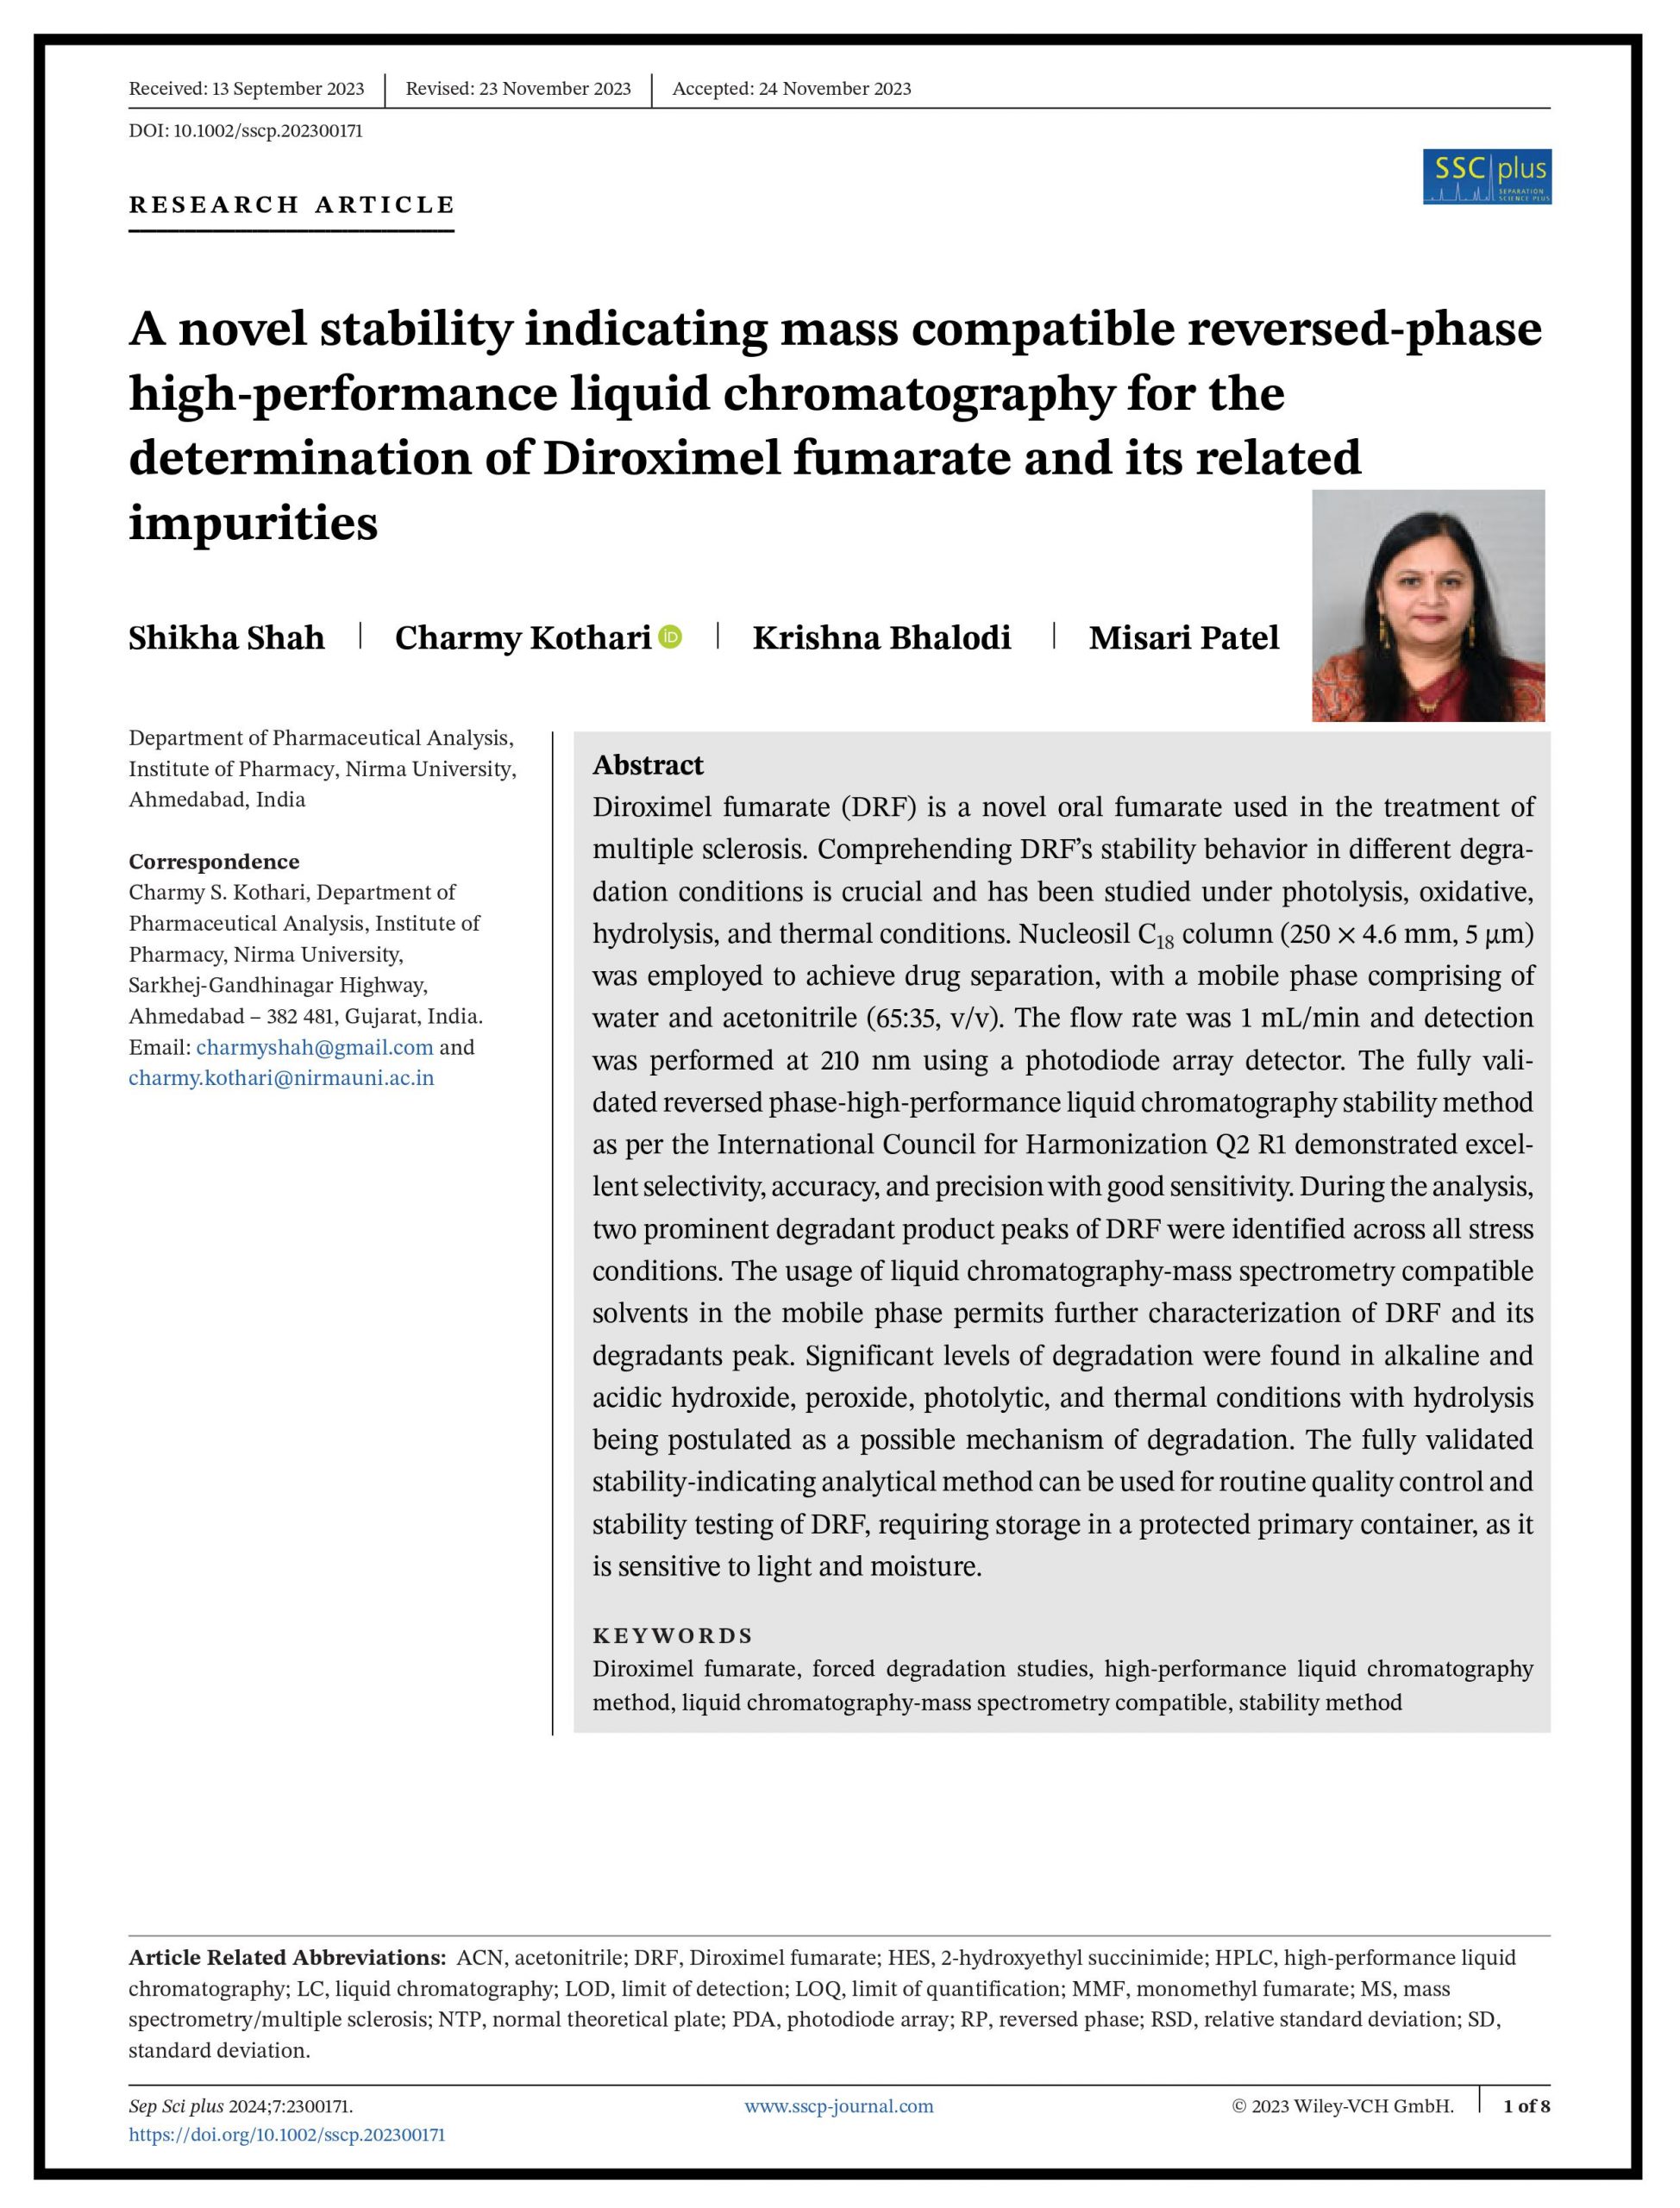 A novel stability indicating mass compatible reversed-phase high-performance liquid chromatography for the determination of Diroximel fumarate and its related Impurities